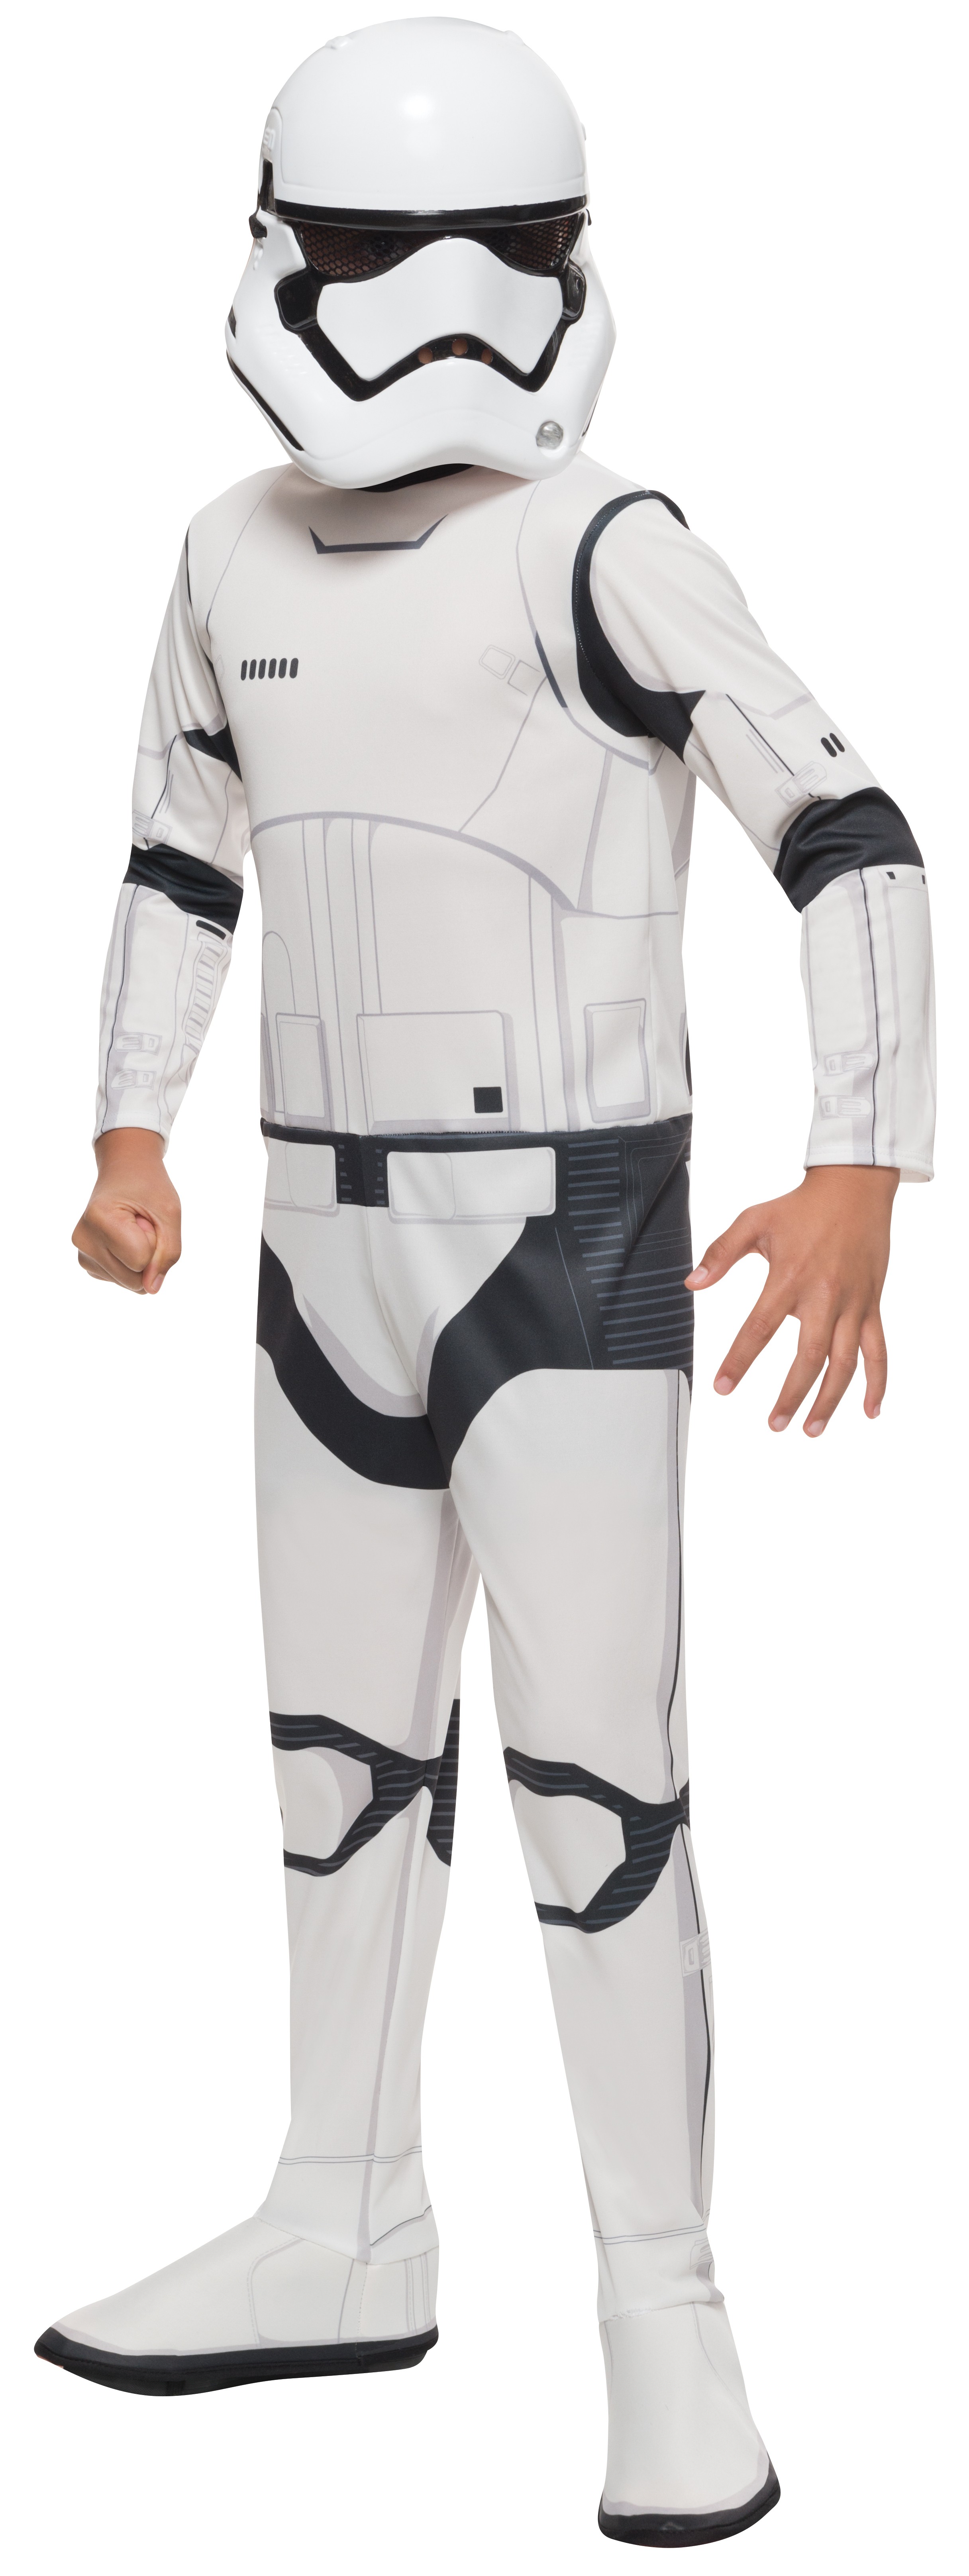 Star Wars Force Awakens Stormtrooper Child Classic Costume Size S,M,L - Click Image to Close